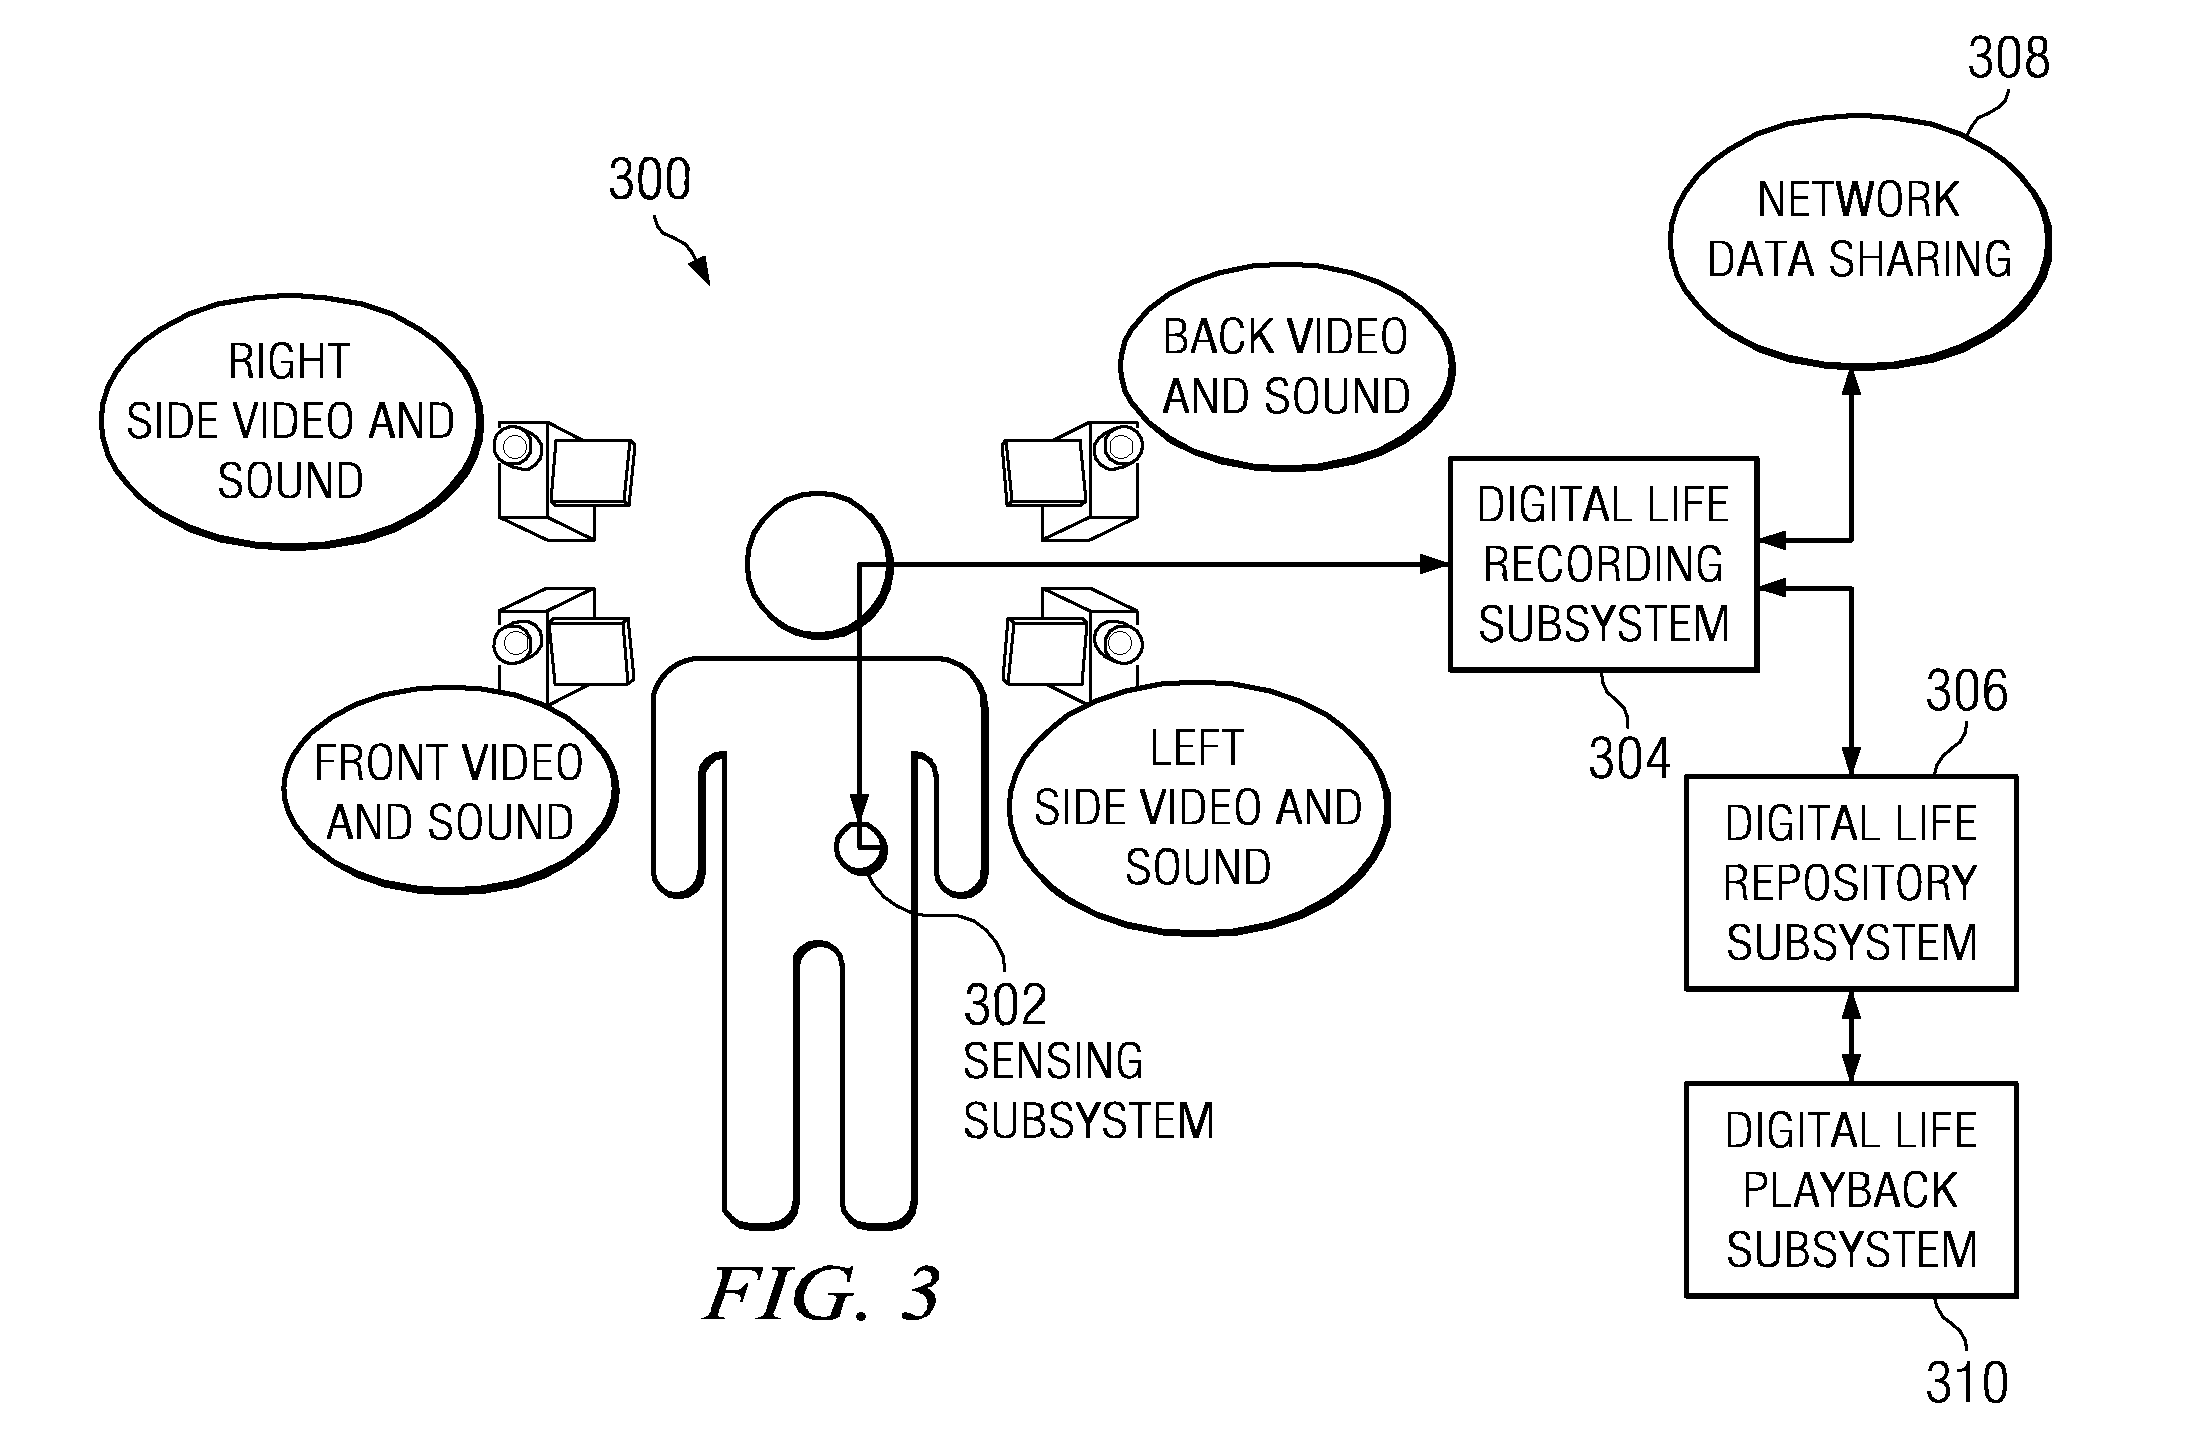 Method and apparatus for digital life recording and playback